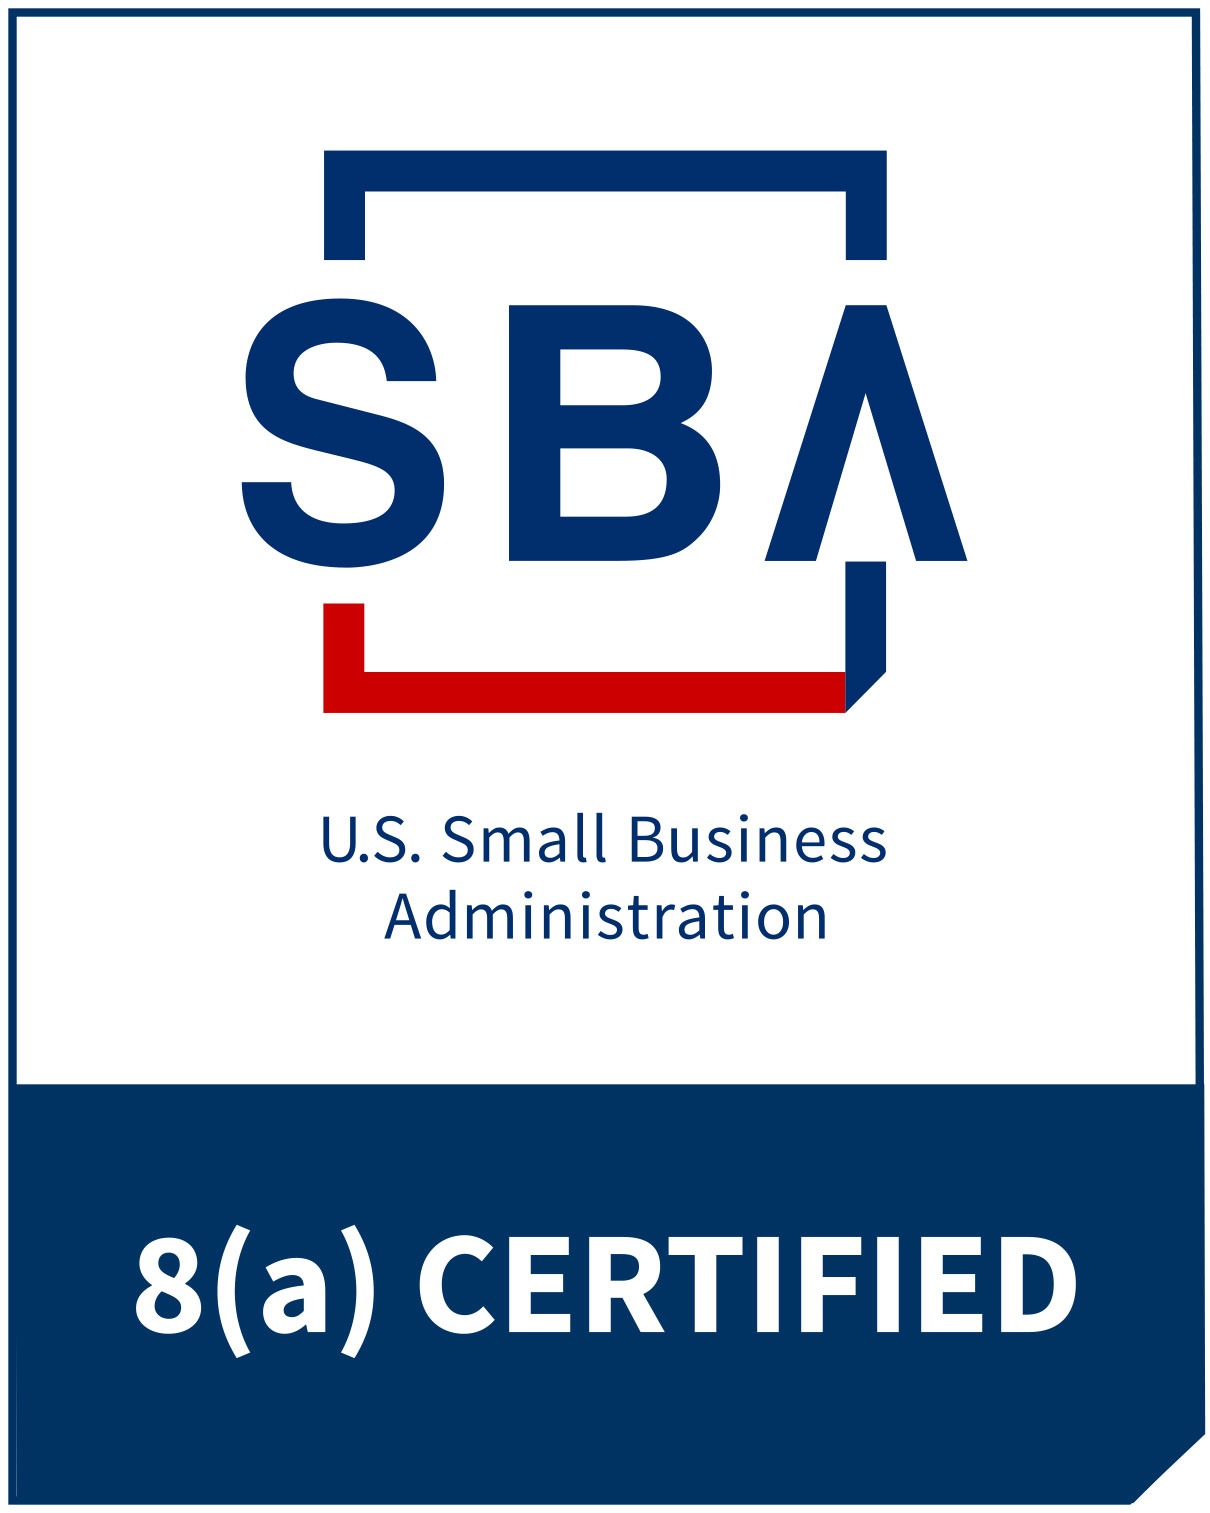 SBA U.S. Small business administration 8(a) Certified